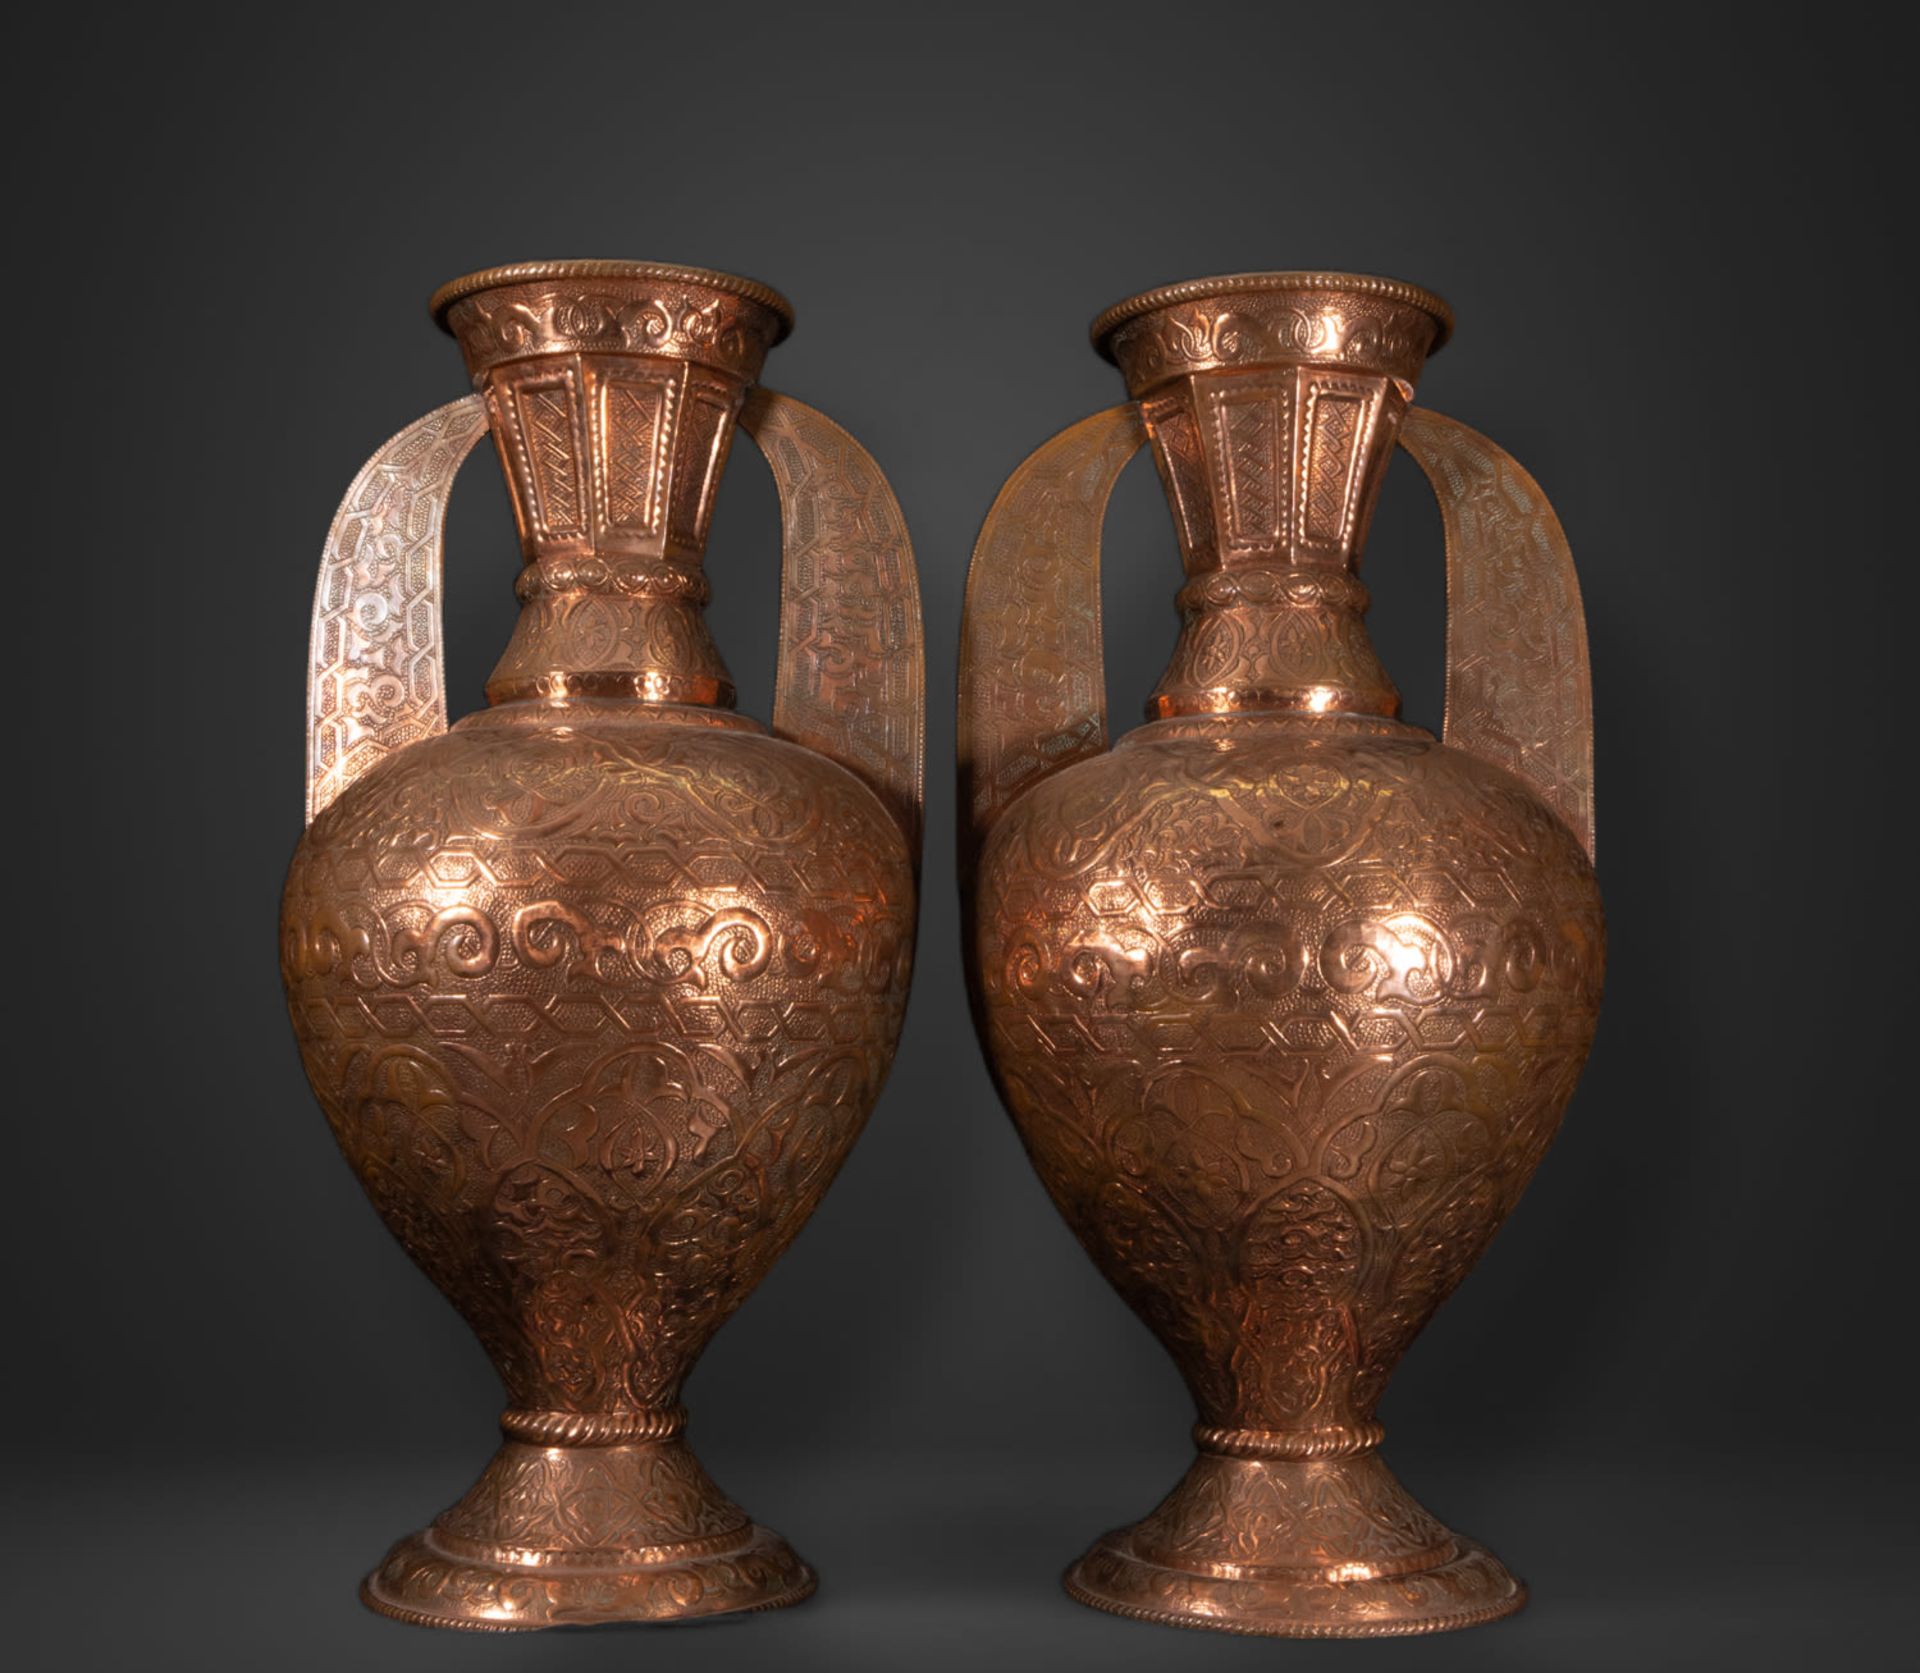 Pair of Large Embossed Copper Vases in the "Alhambra" style, Andalusian Granada work from the 19th c - Bild 2 aus 10